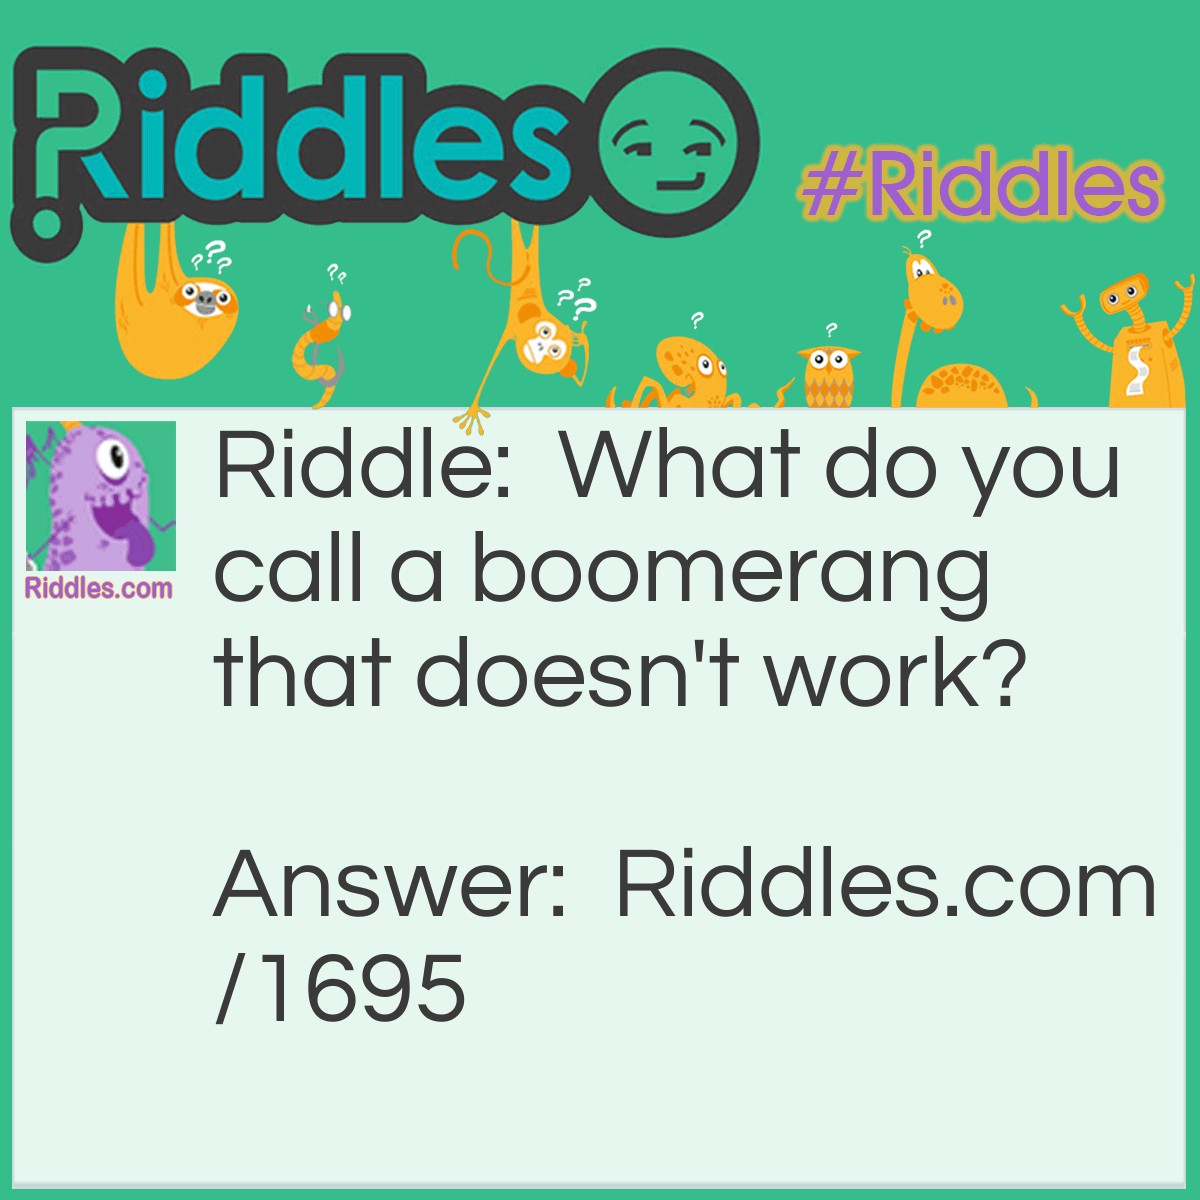 Riddle: What do you call a boomerang that doesn't work? Answer: A stick.